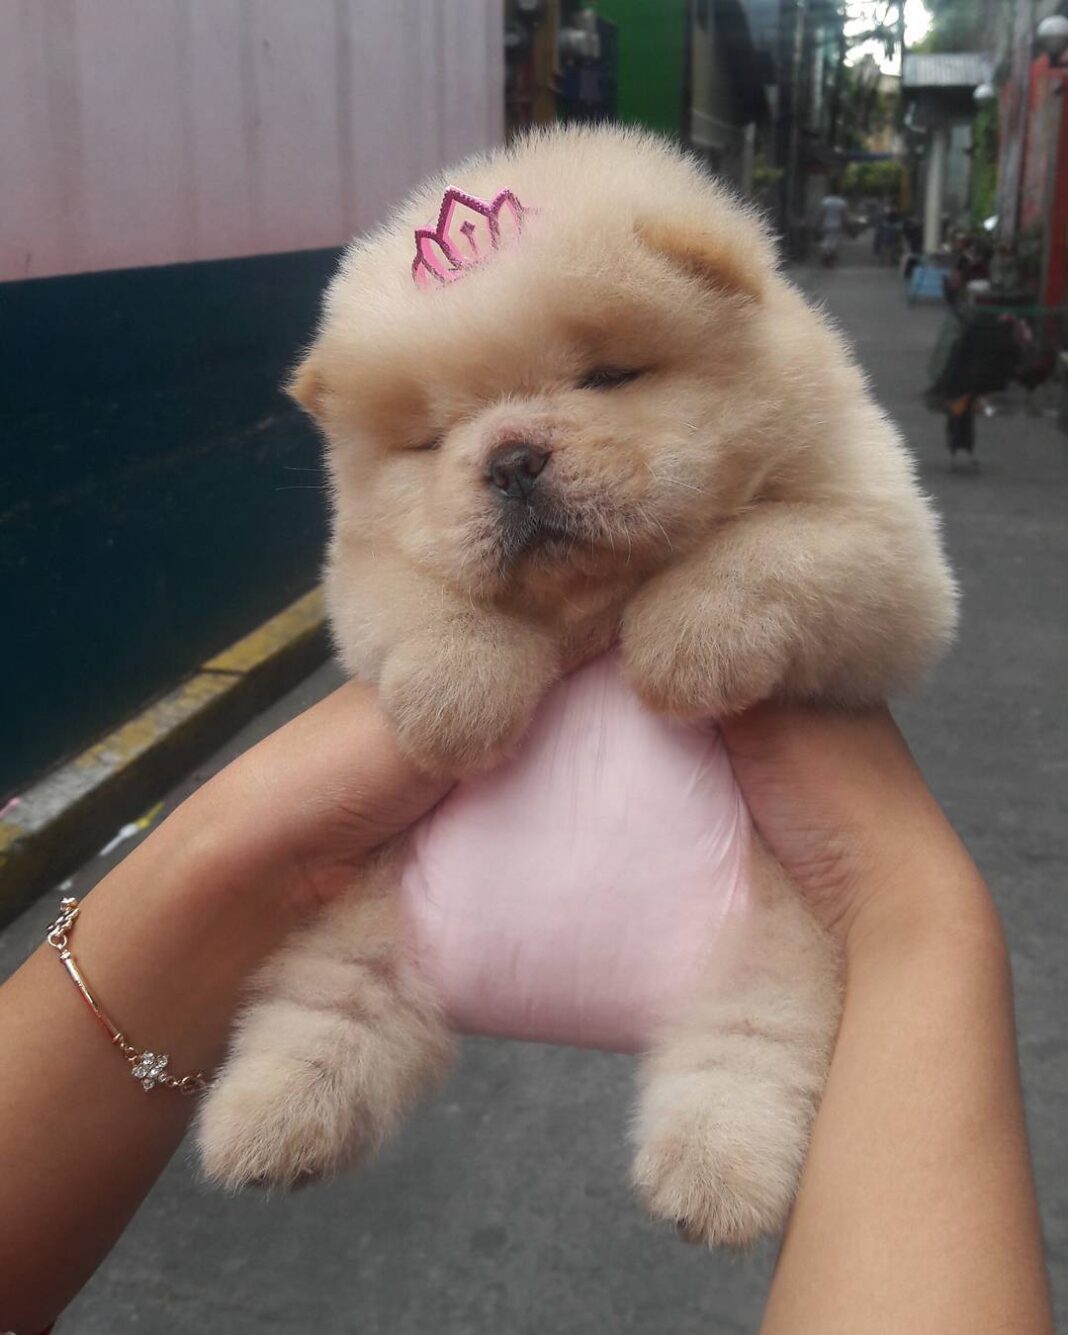 20 Pics Of Chunky Puppies That Look Exactly Like Teddy Bears